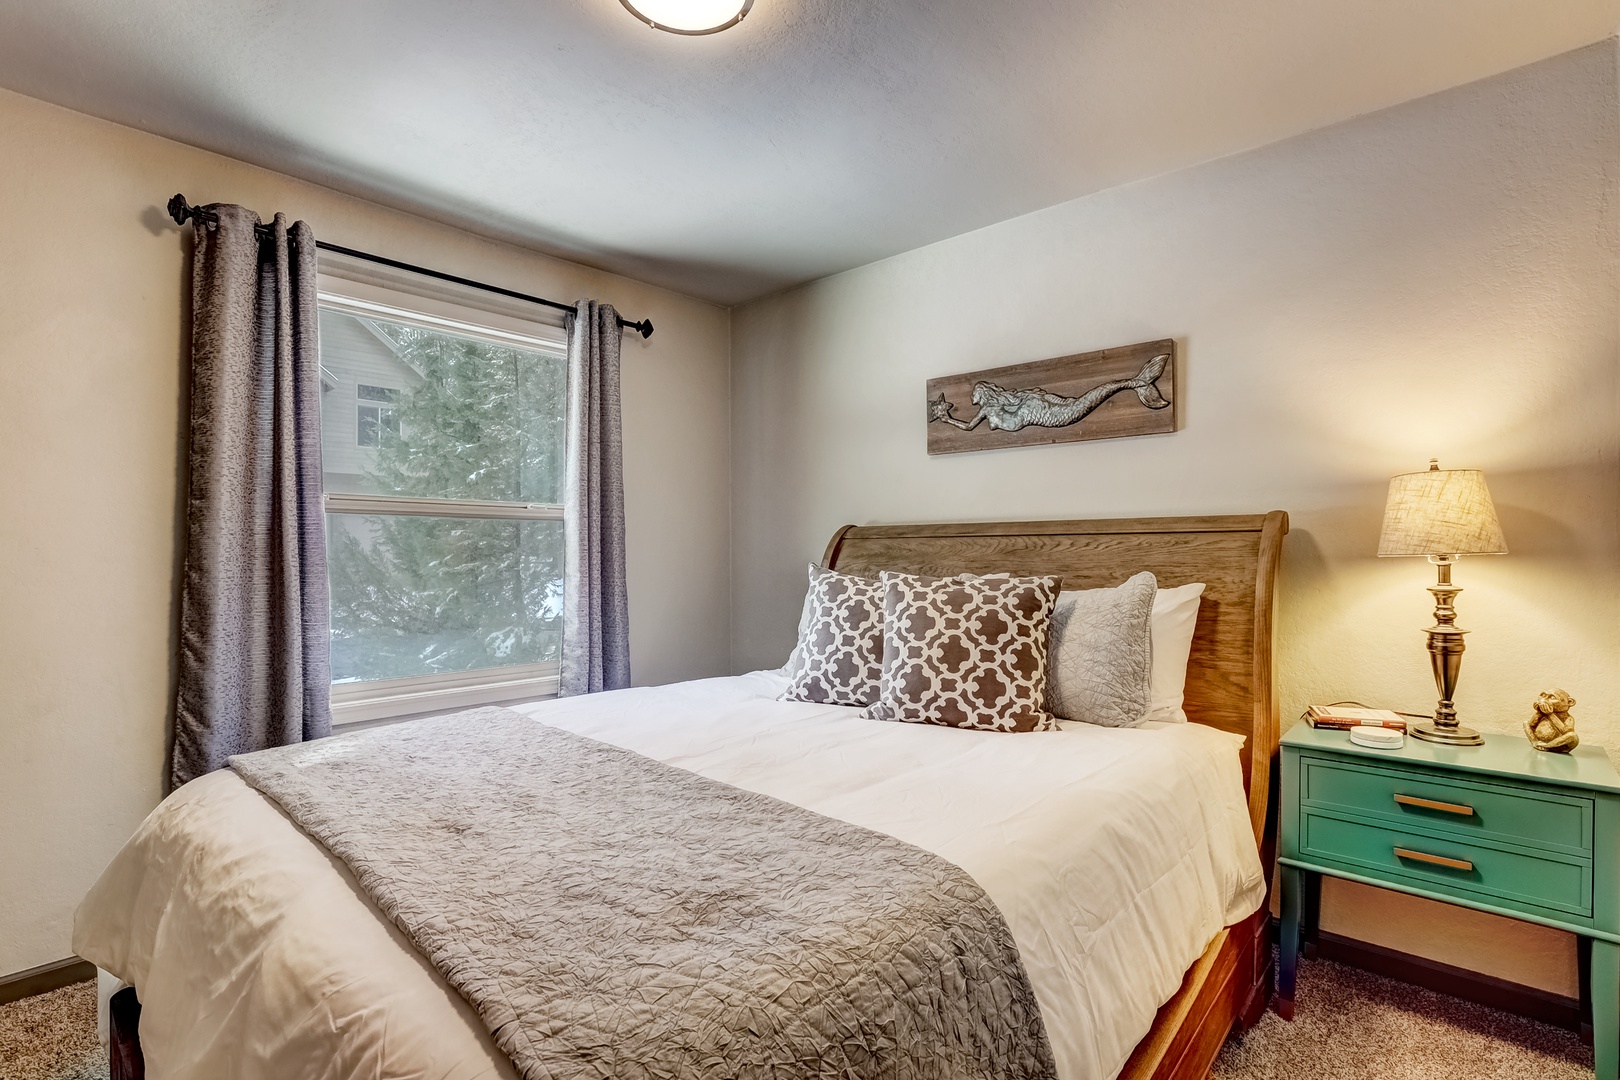 On the main level, the 1st of 2 bedrooms offers a comfortable queen bed